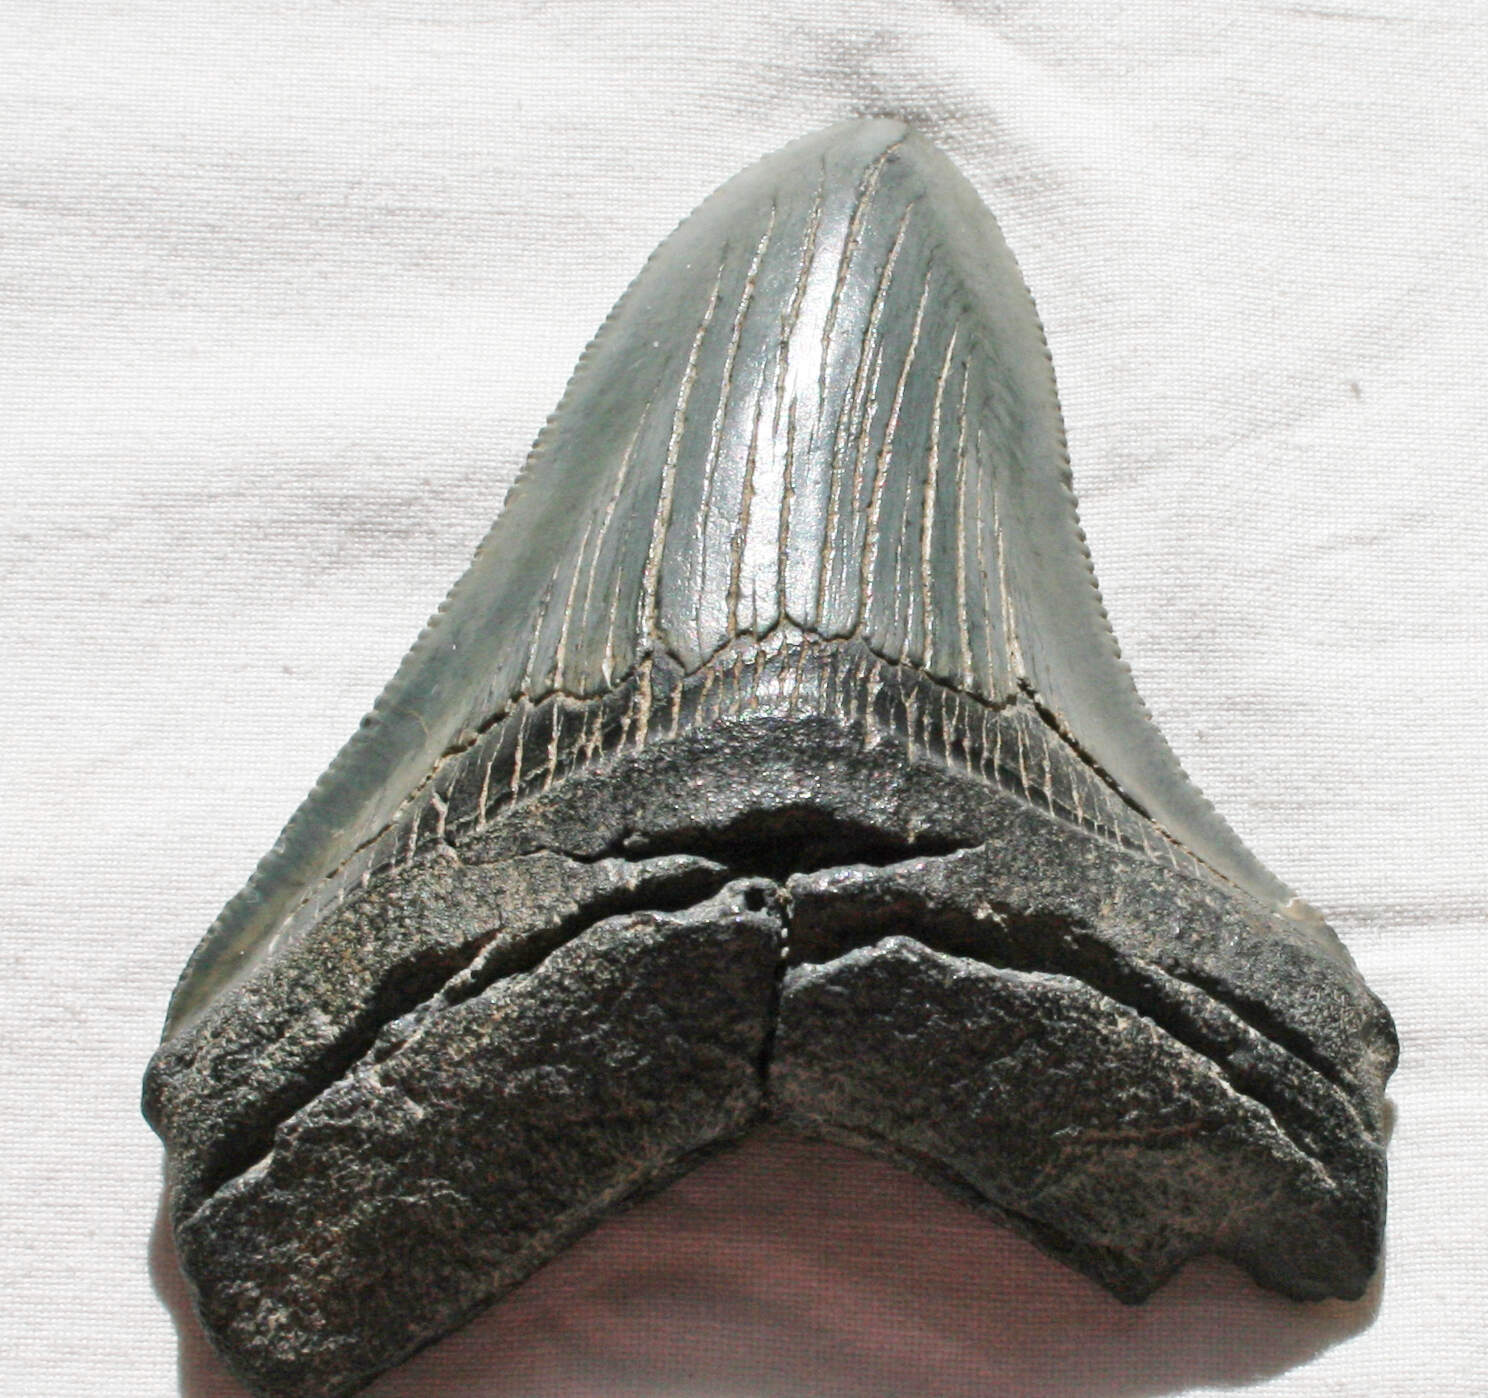 Carcharodon Megalodon tooth